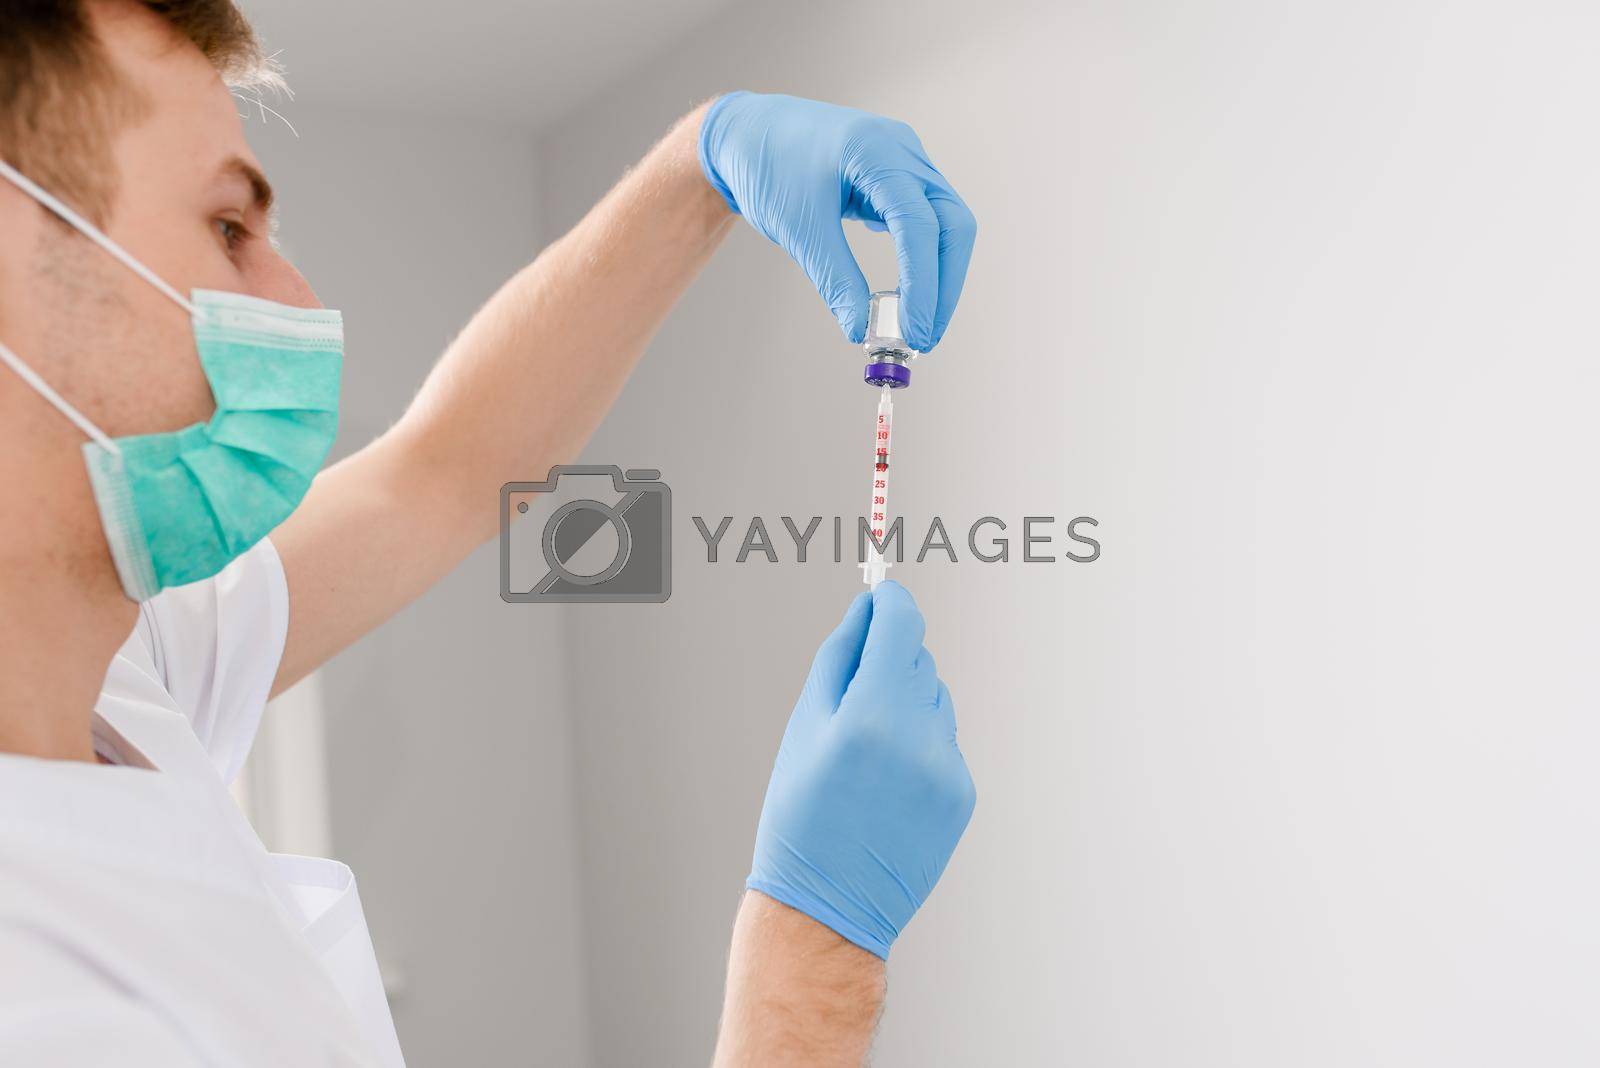 Royalty free image of Botox injections. Botulinum toxin is a neurotoxic protein produced by the bacterium Clostridium botulinum and related species. by Rabizo